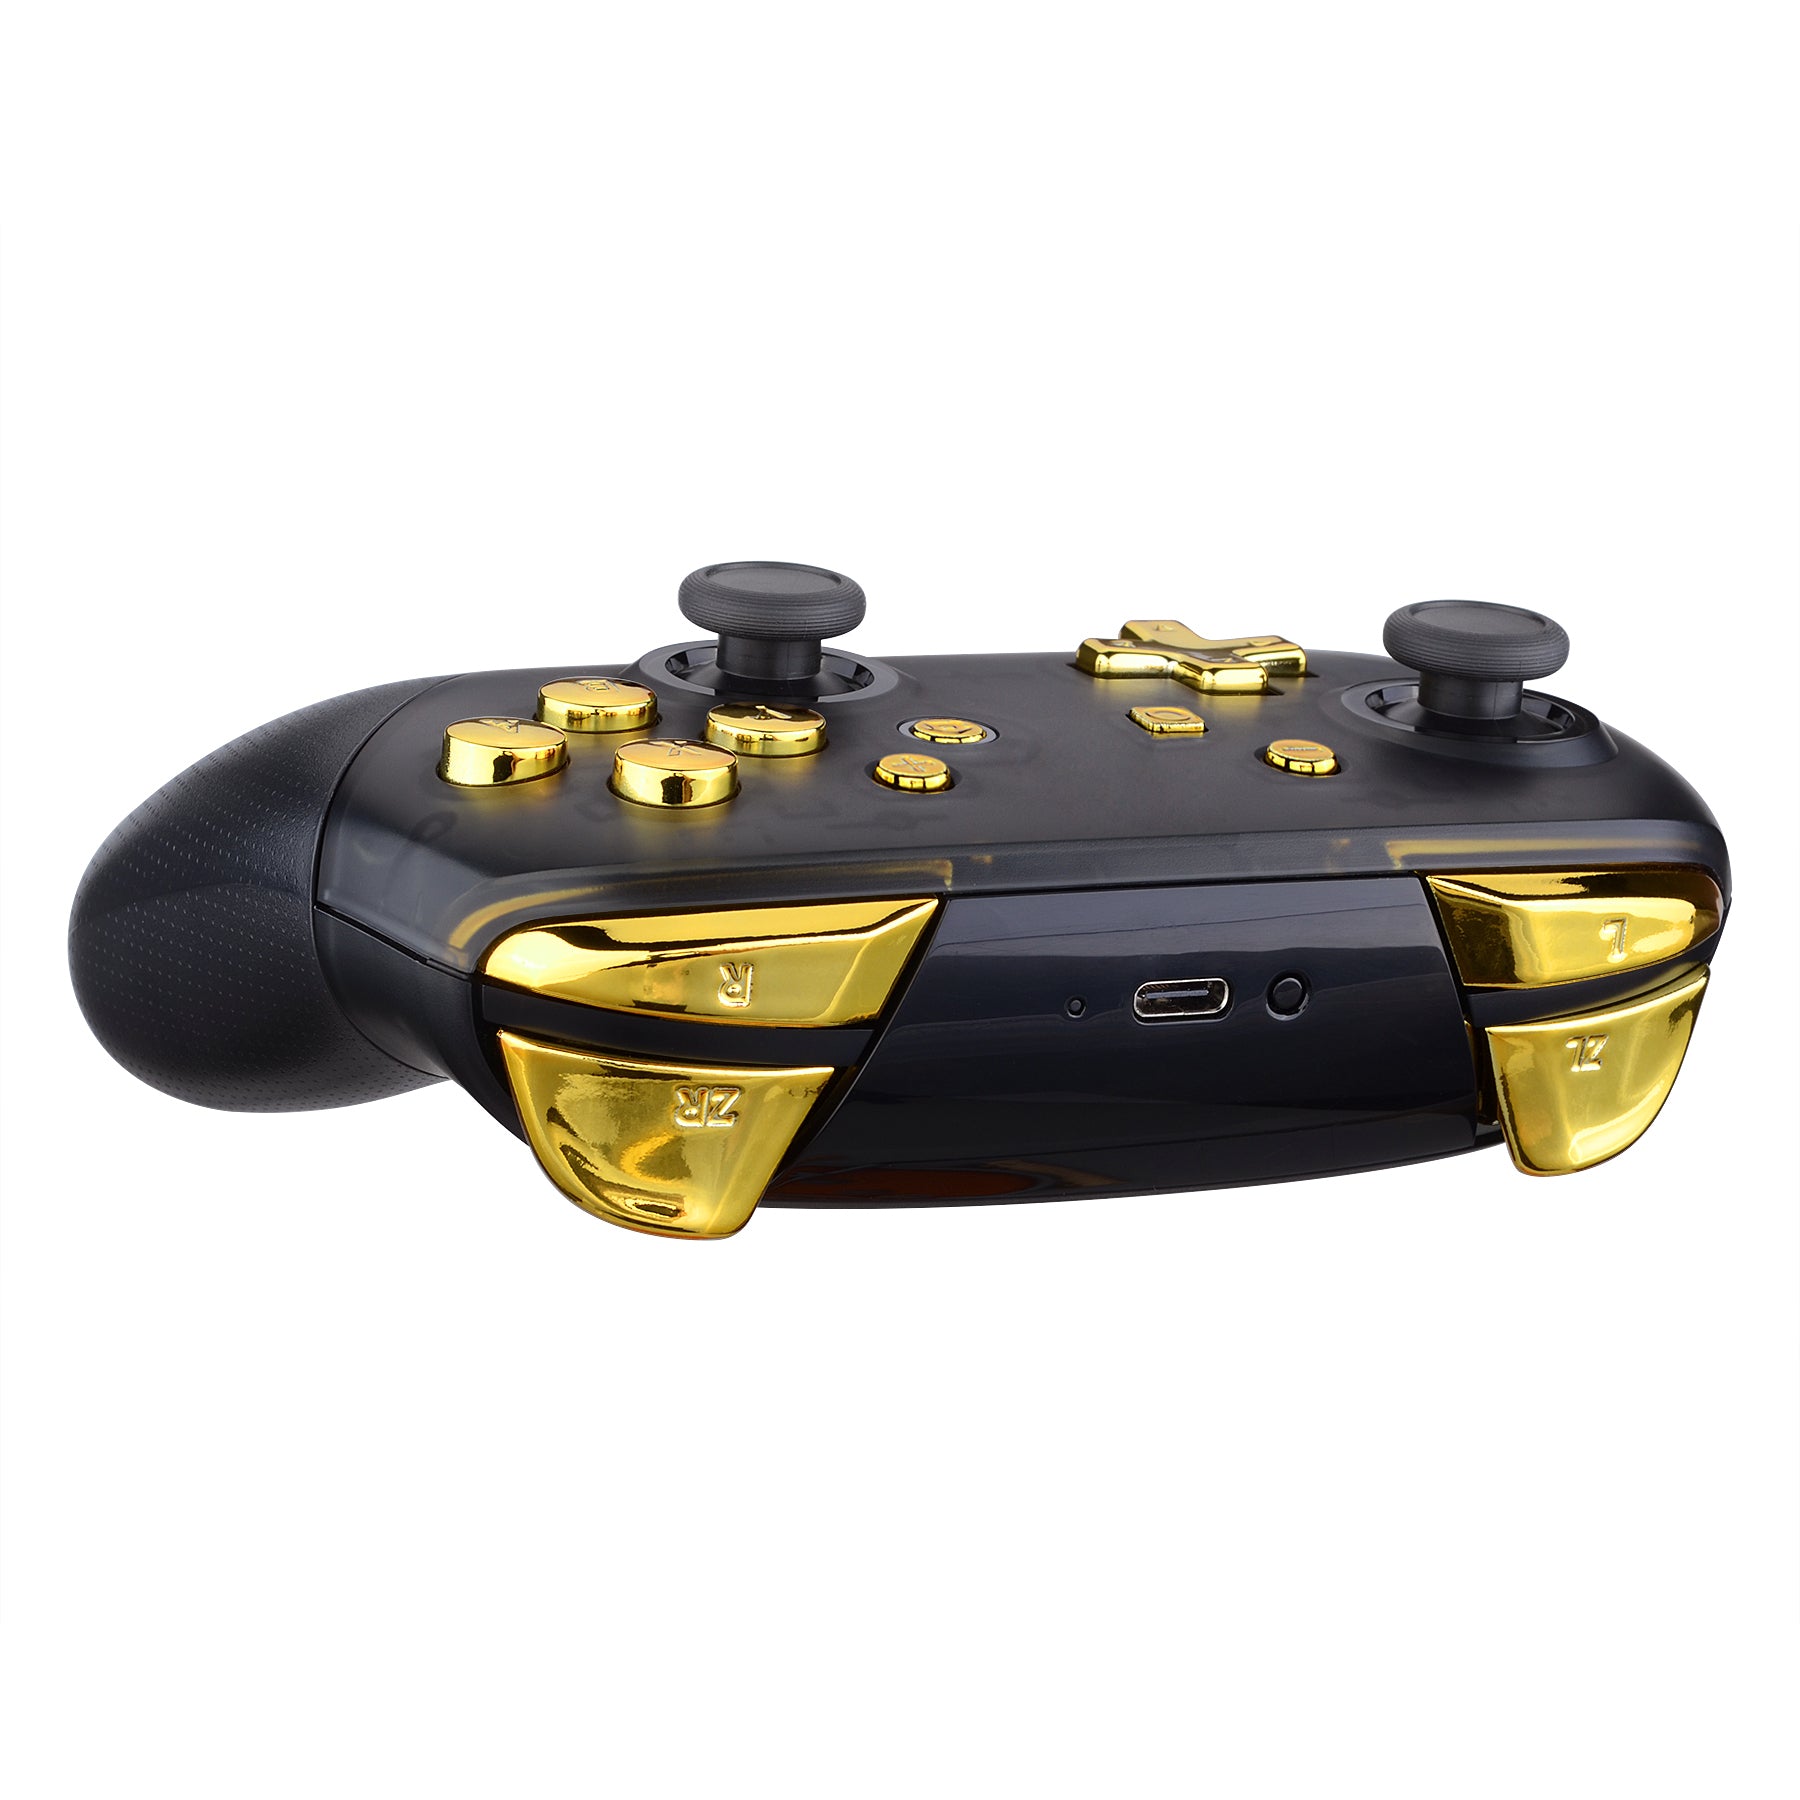 eXtremeRate Chrome Gold Repair ABXY D-pad ZR ZL L R Keys for